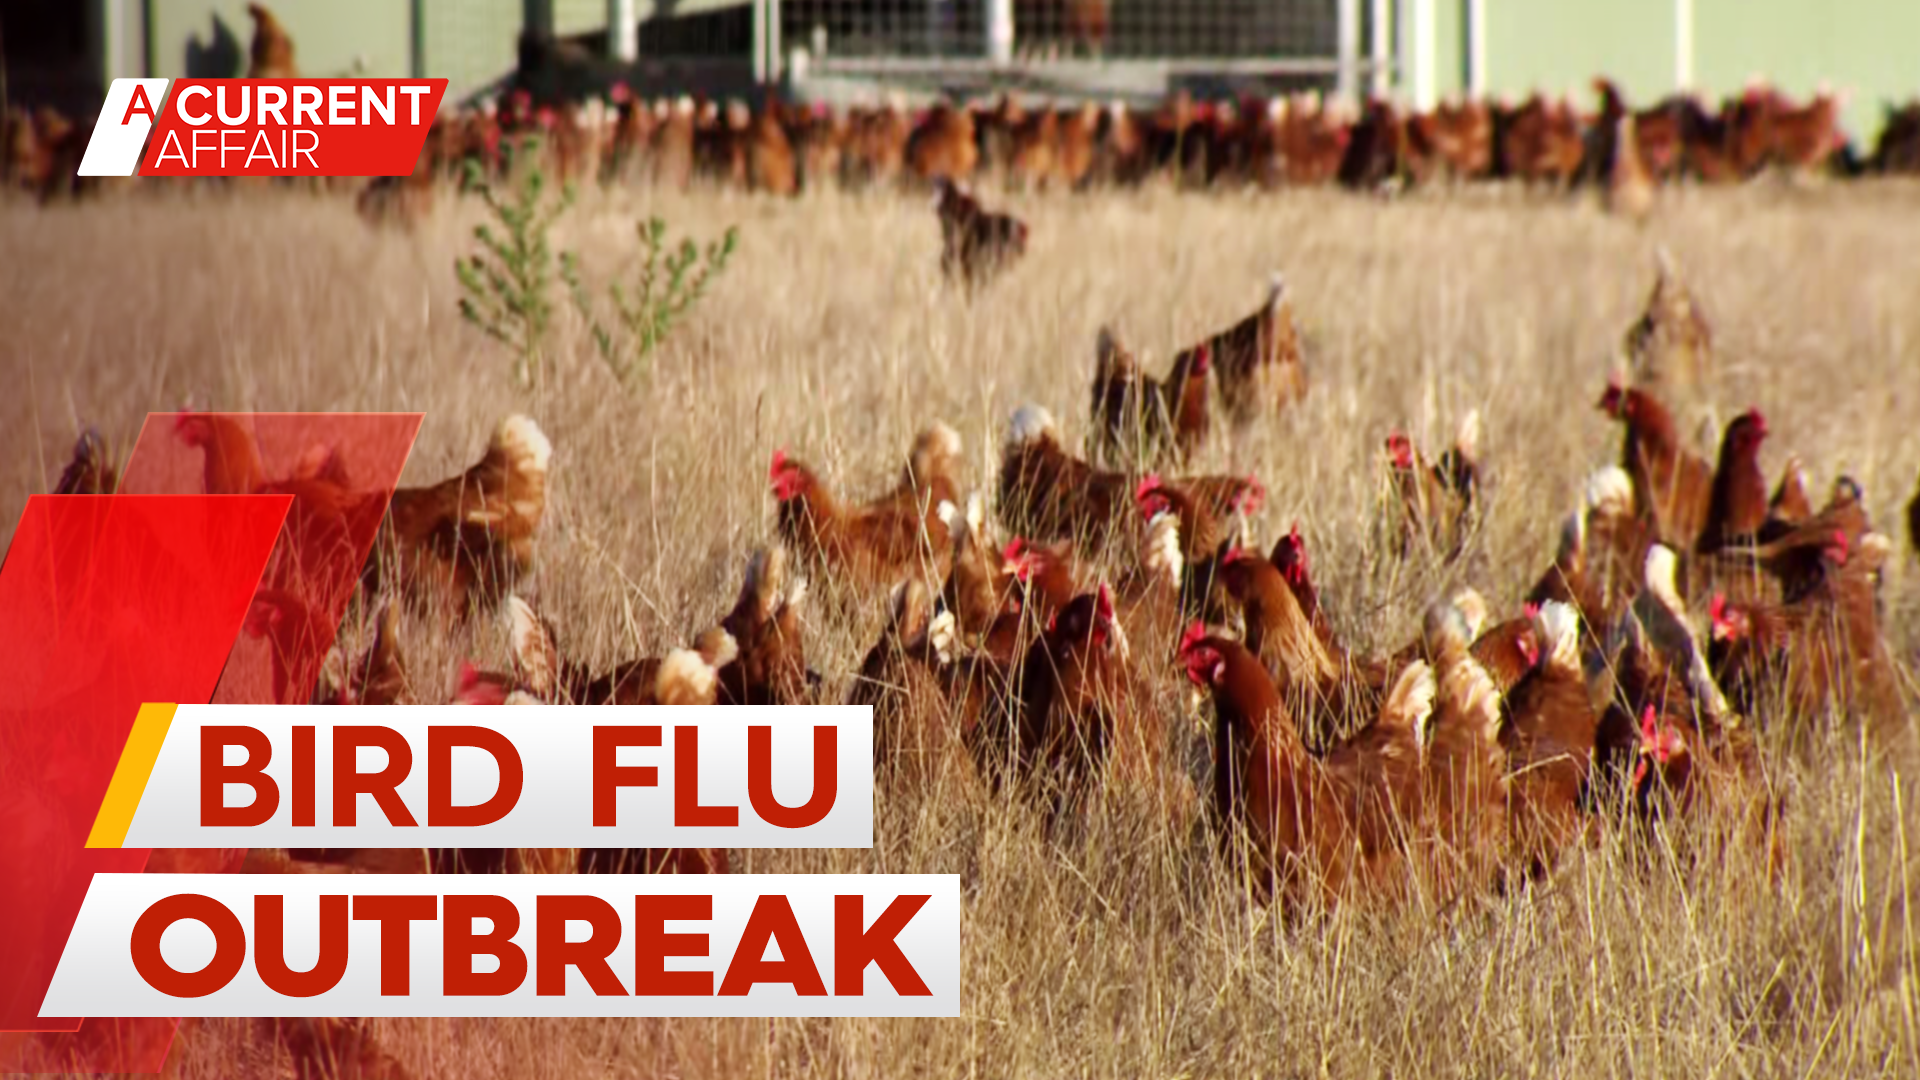 Experts unpack concerns as Australia's worst-ever bird flu outbreak continues